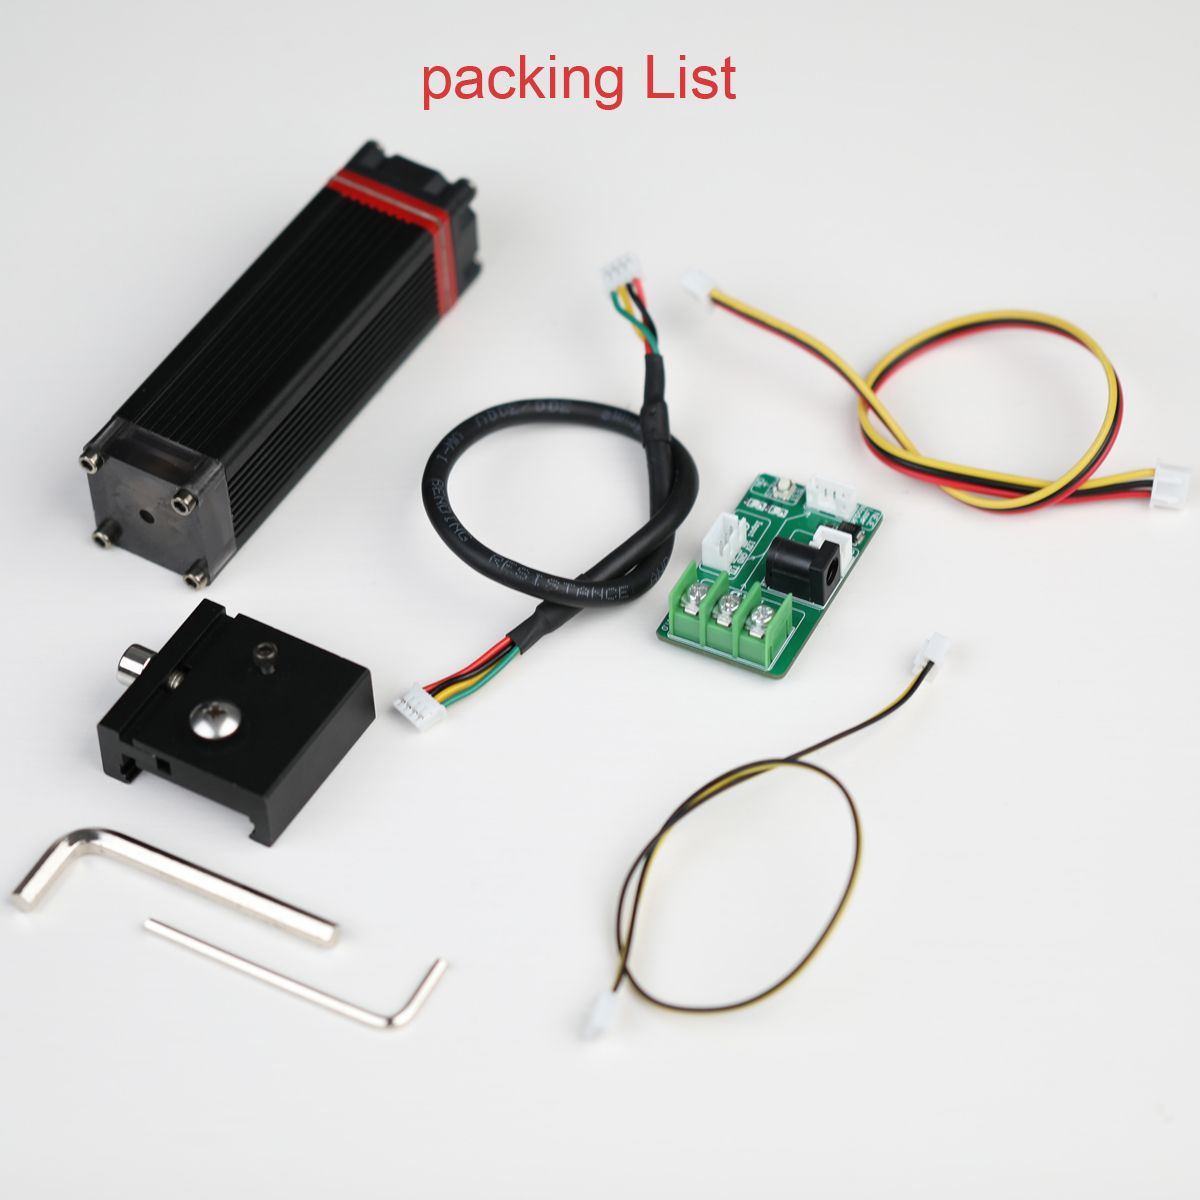 NEJE-30W-Laser-Cutting-Module-Fixed-Focusable-Lens-Vision-Protection-Modified-Laser-Air-Assist-For-L-1758629